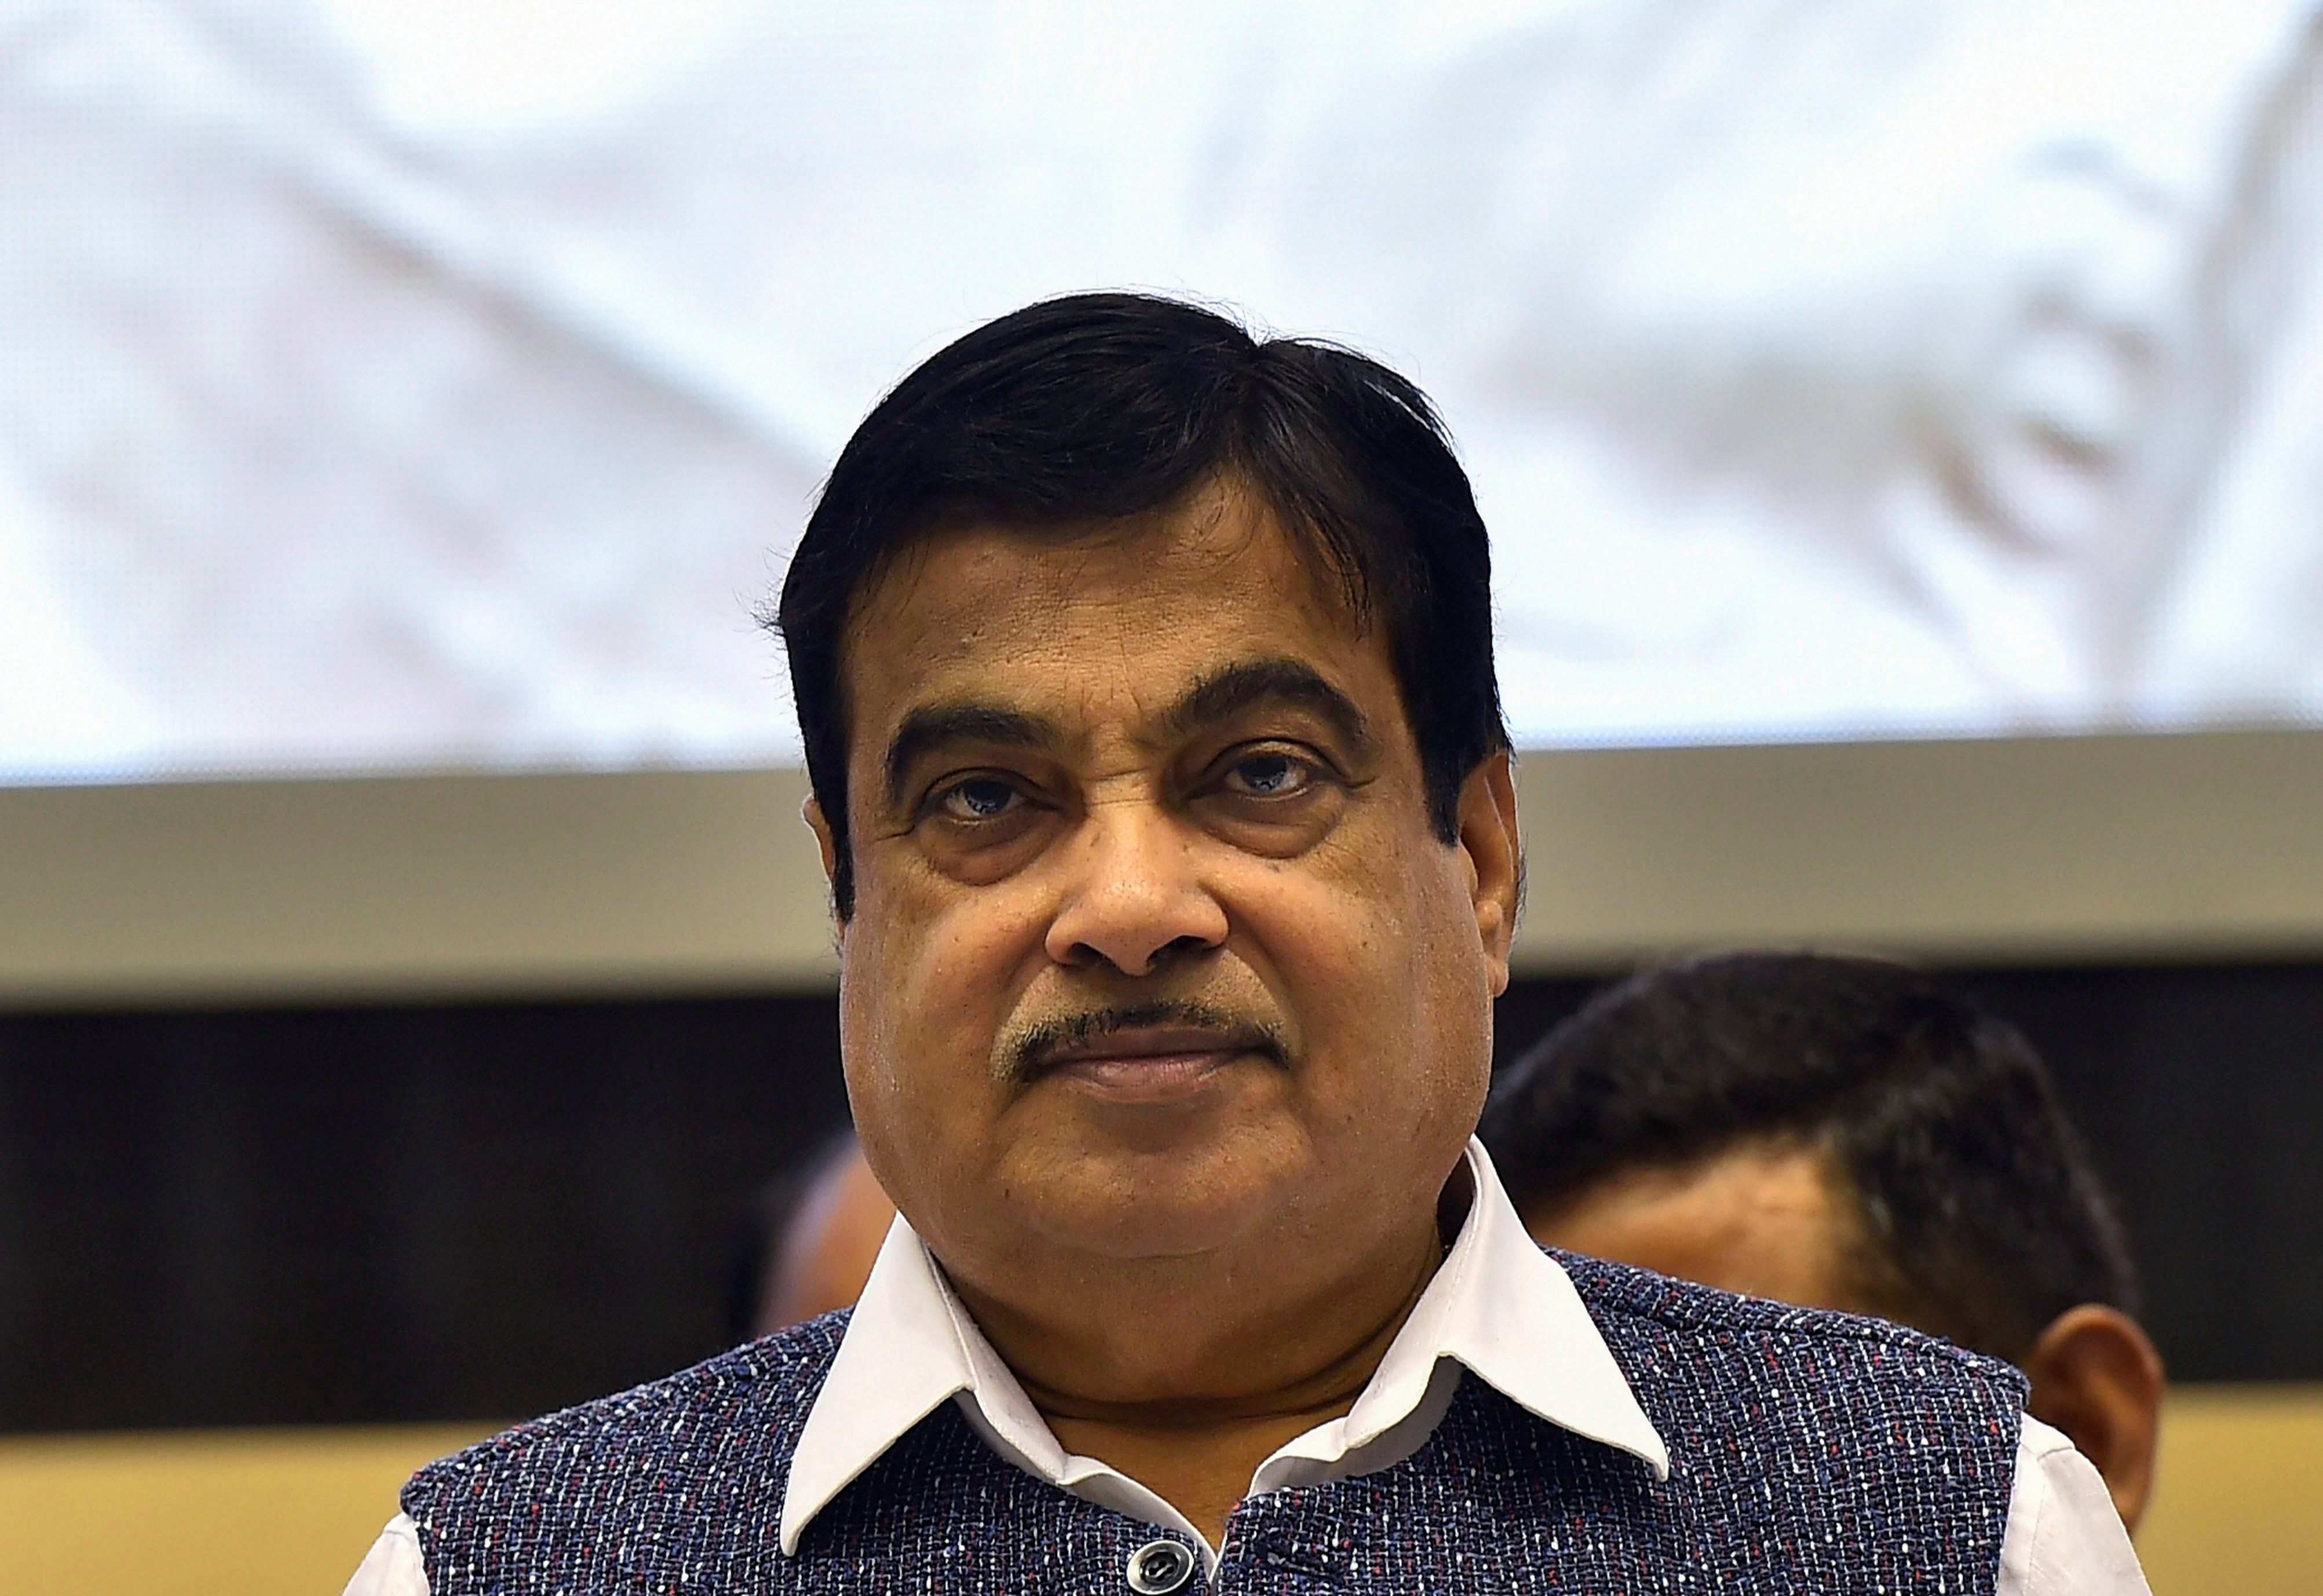 New Delhi: Union Minister for Road Transport and Highways Nitin Gadkari releases a book during inauguration of the 29th National Road Safety Week 2018 in New Delhi on Monday. PTI Photo by Kamal Singh (PTI4_23_2018_000031B)